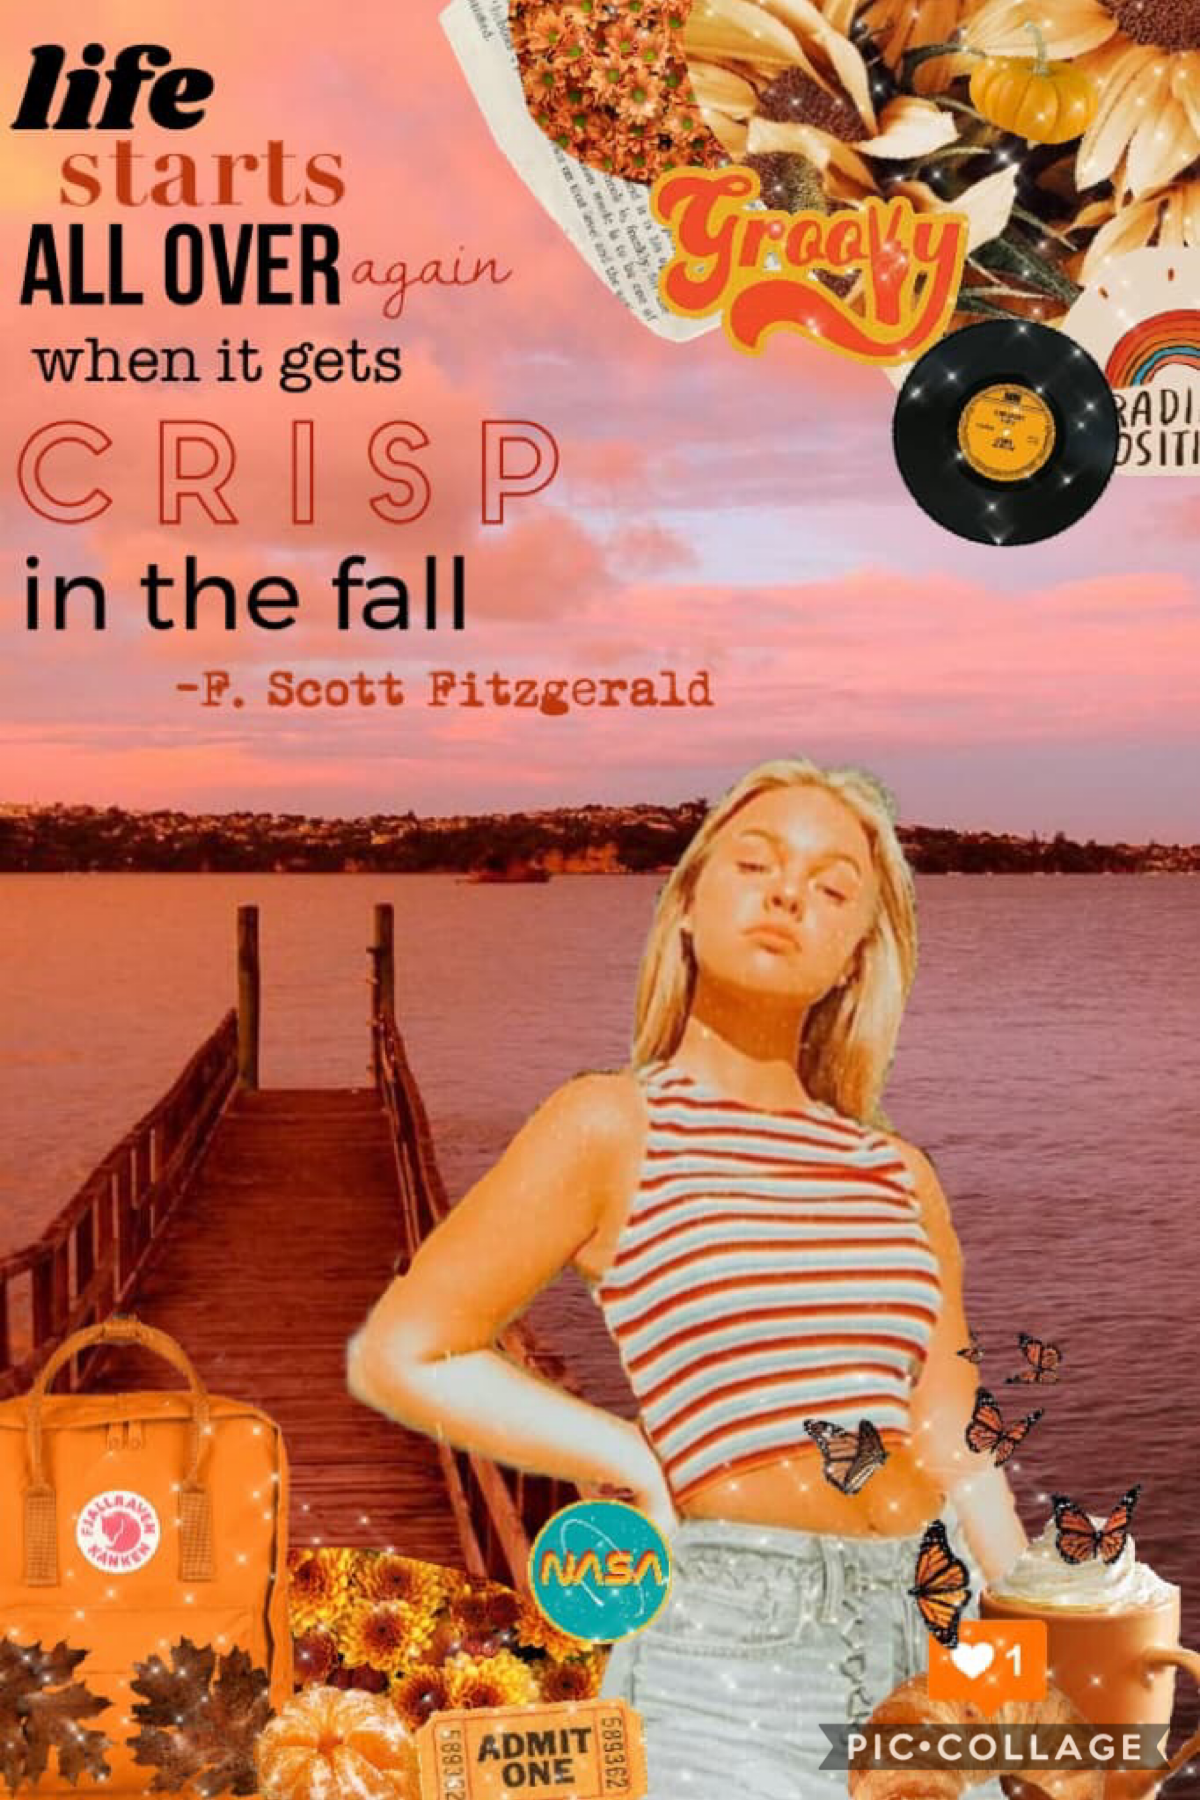 🍂tap🍂

this is my entry to virago_life ’s, goodbye summer hello autumn contest! lmk what u think! 